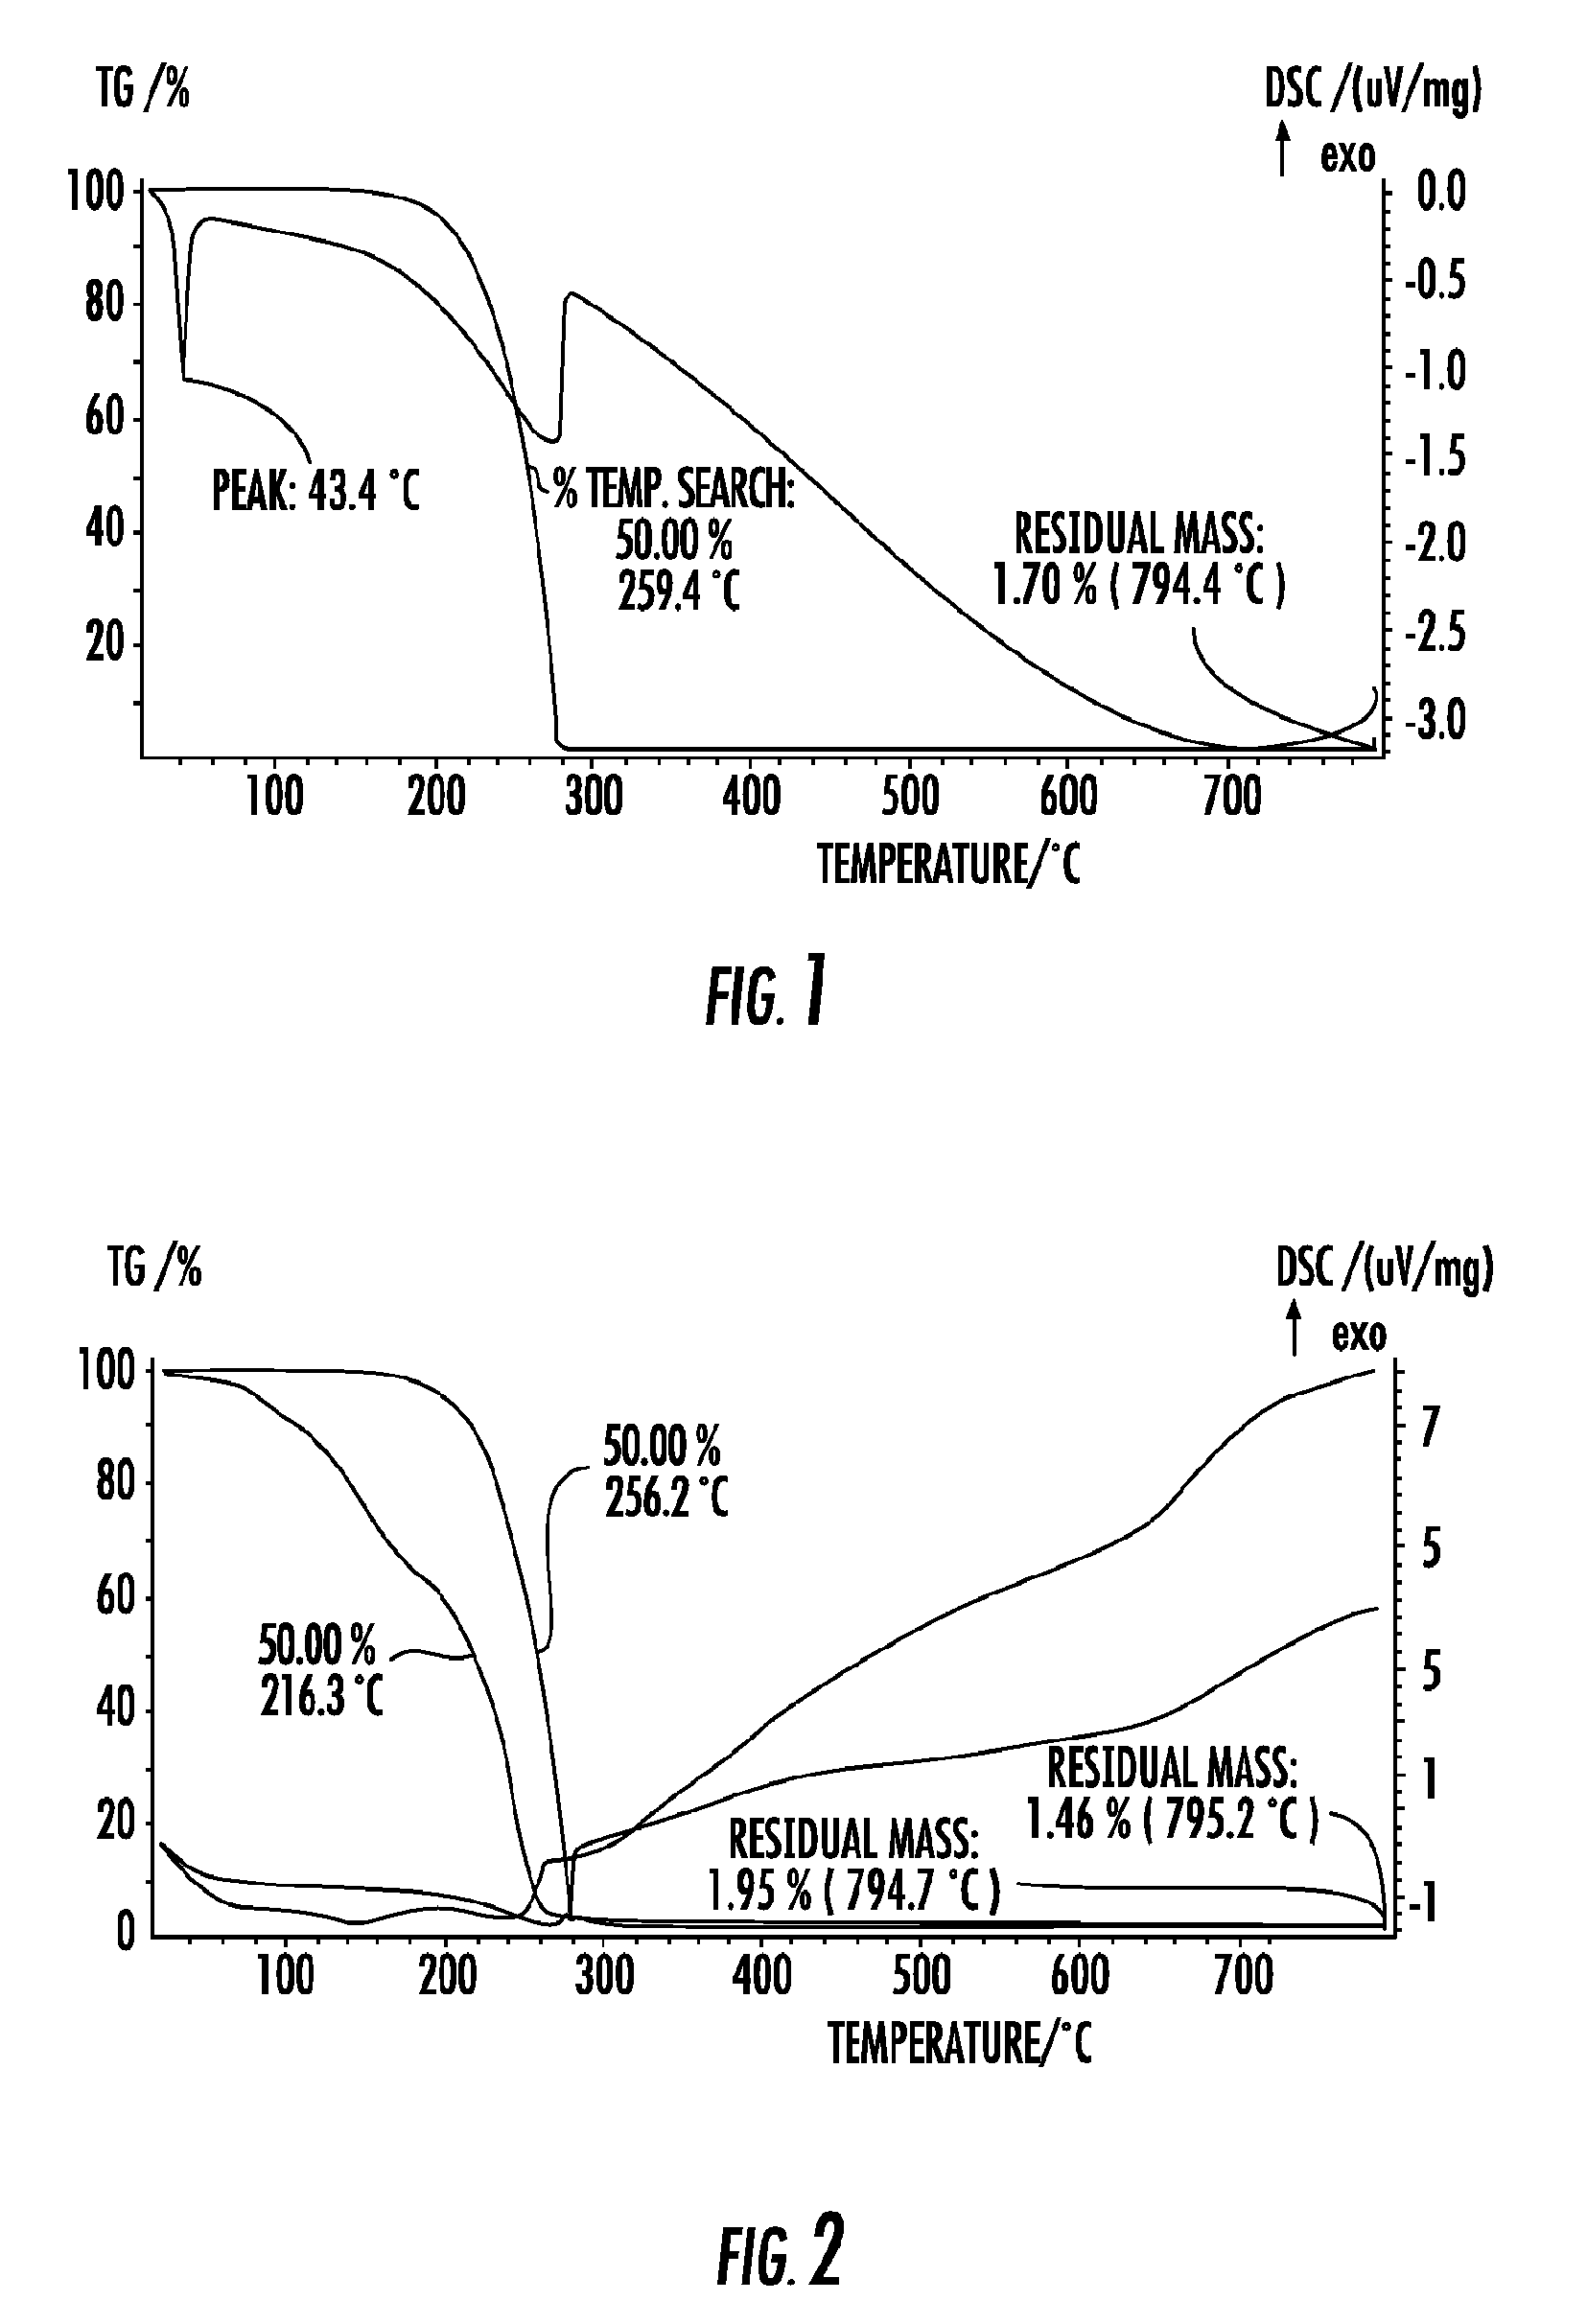 Strontium and barium precursors for use in chemical vapor deposition, atomic layer deposition and rapid vapor deposition